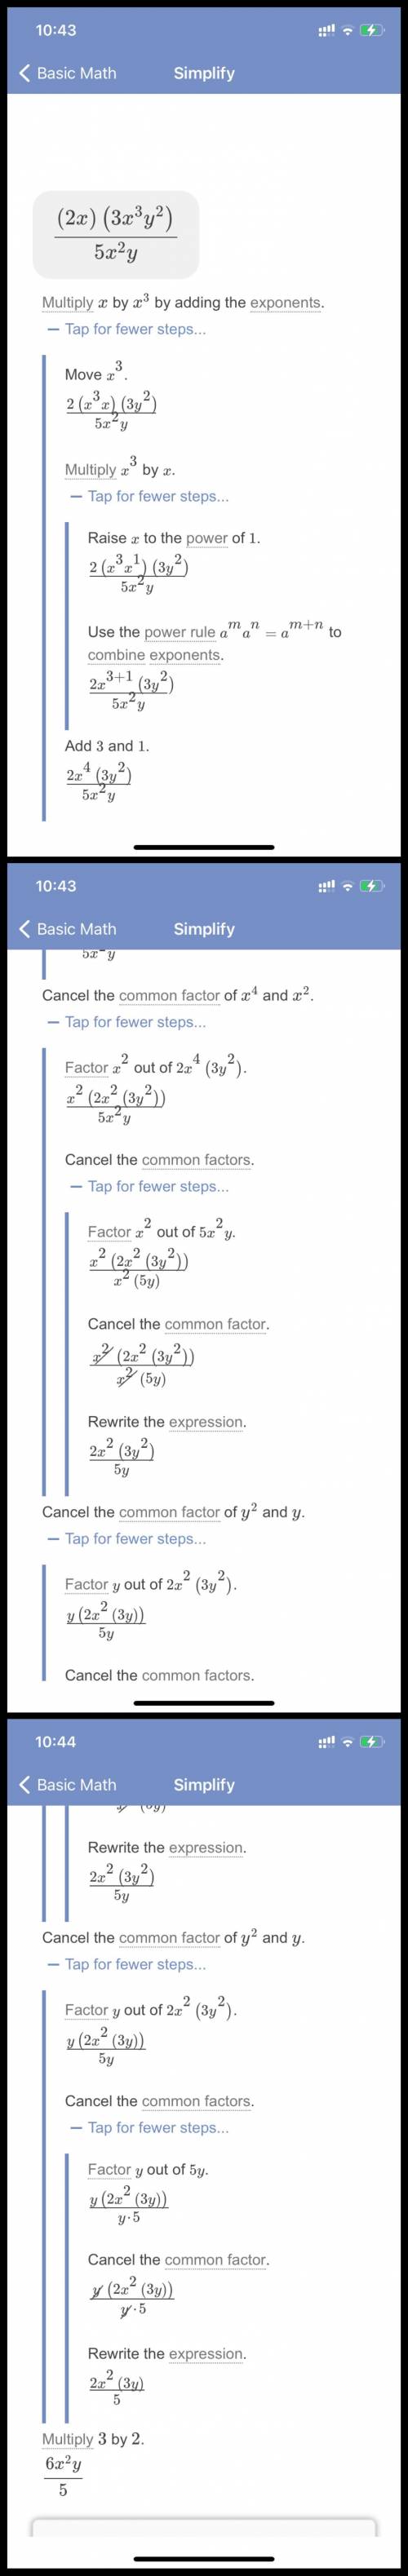 NEED HELP ASAP | 25+ POINTS | PROPERTIES OF EXPONETS/SIMPLIFY EXPRESSIONS | PLEASE HELP

Simplify t